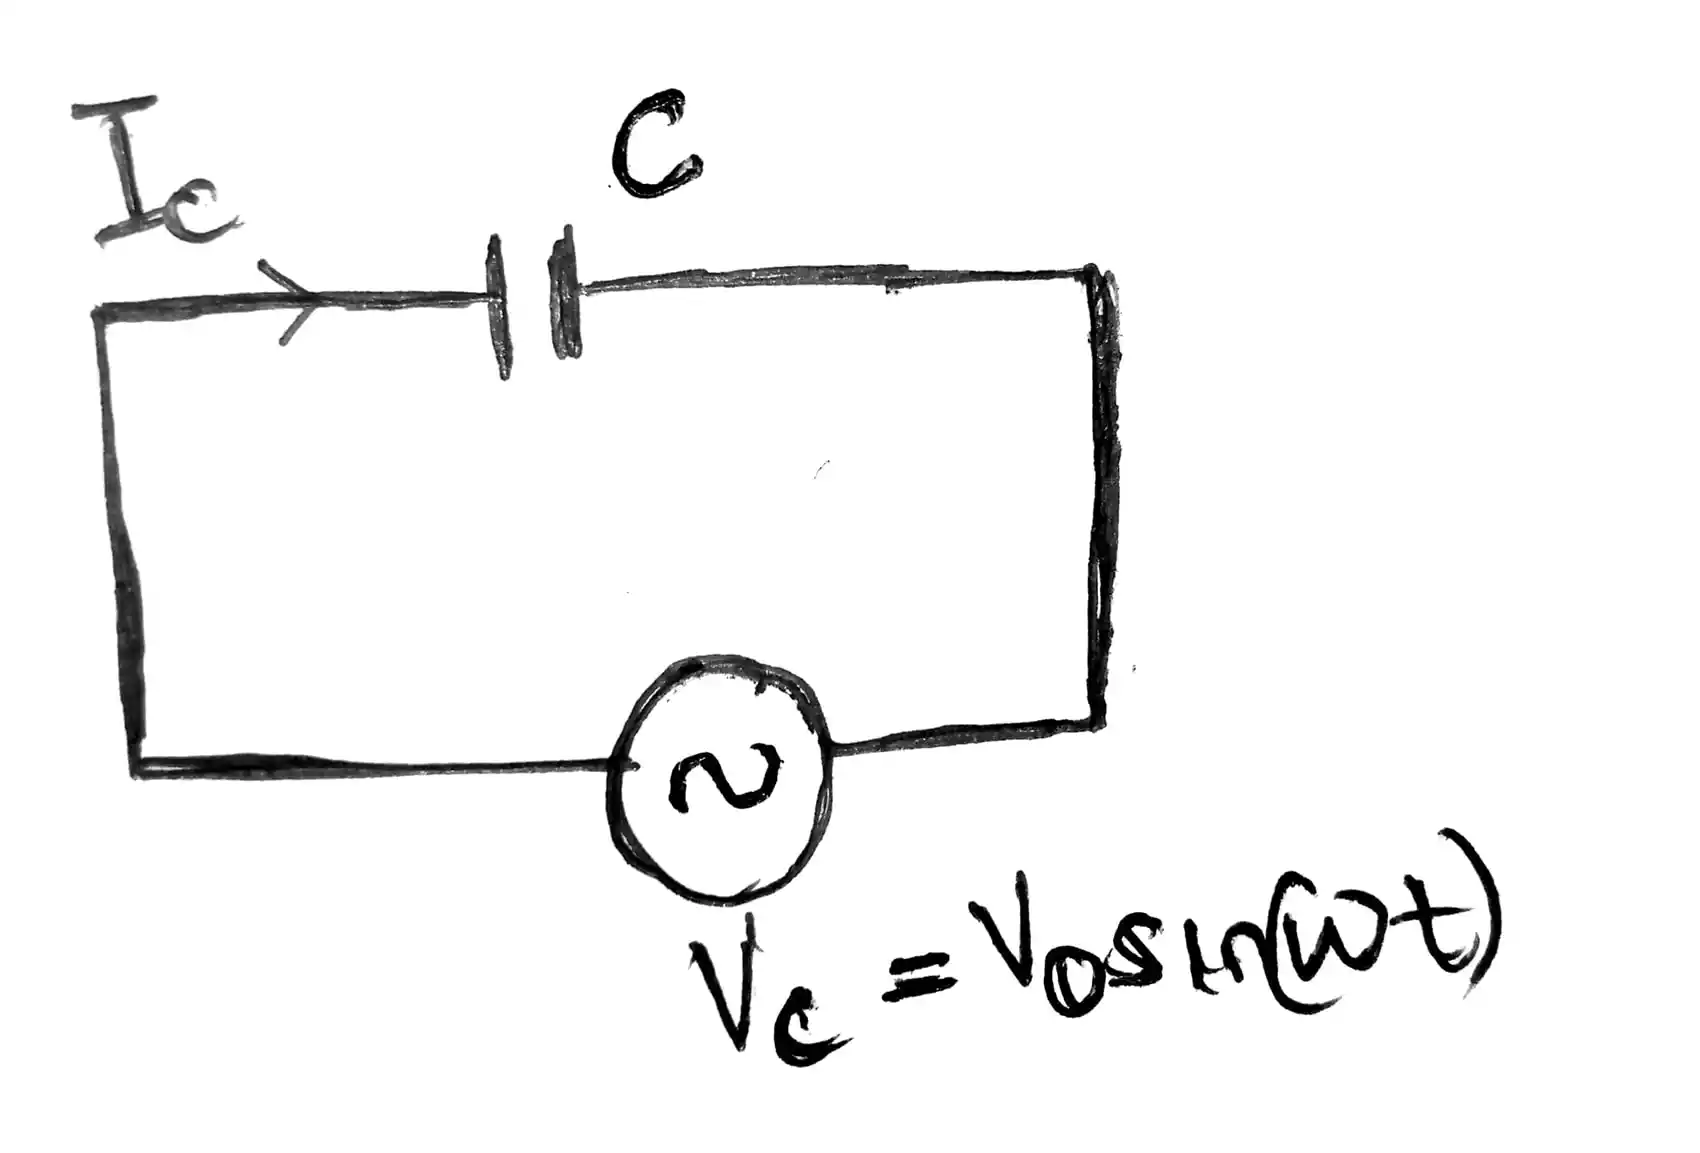 Solved: Verify that the conduction current in the wire equals the displacement current ...